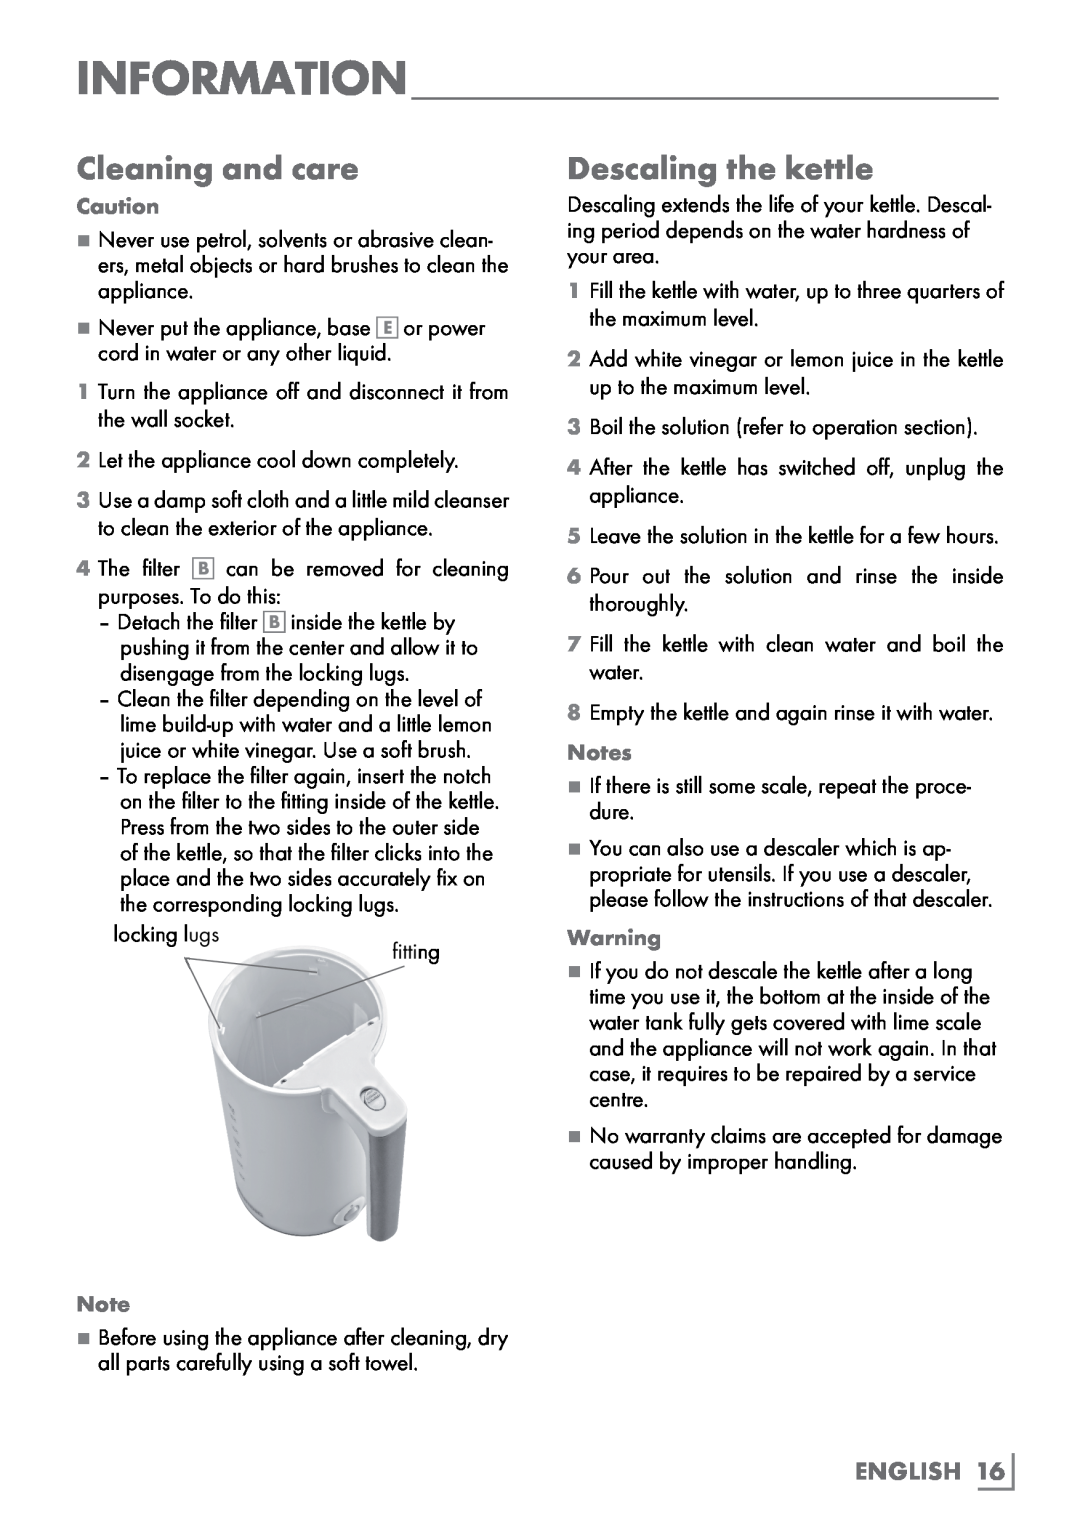 Grundig WK 4062 manual Information, Cleaning and care, Descaling the kettle, English 